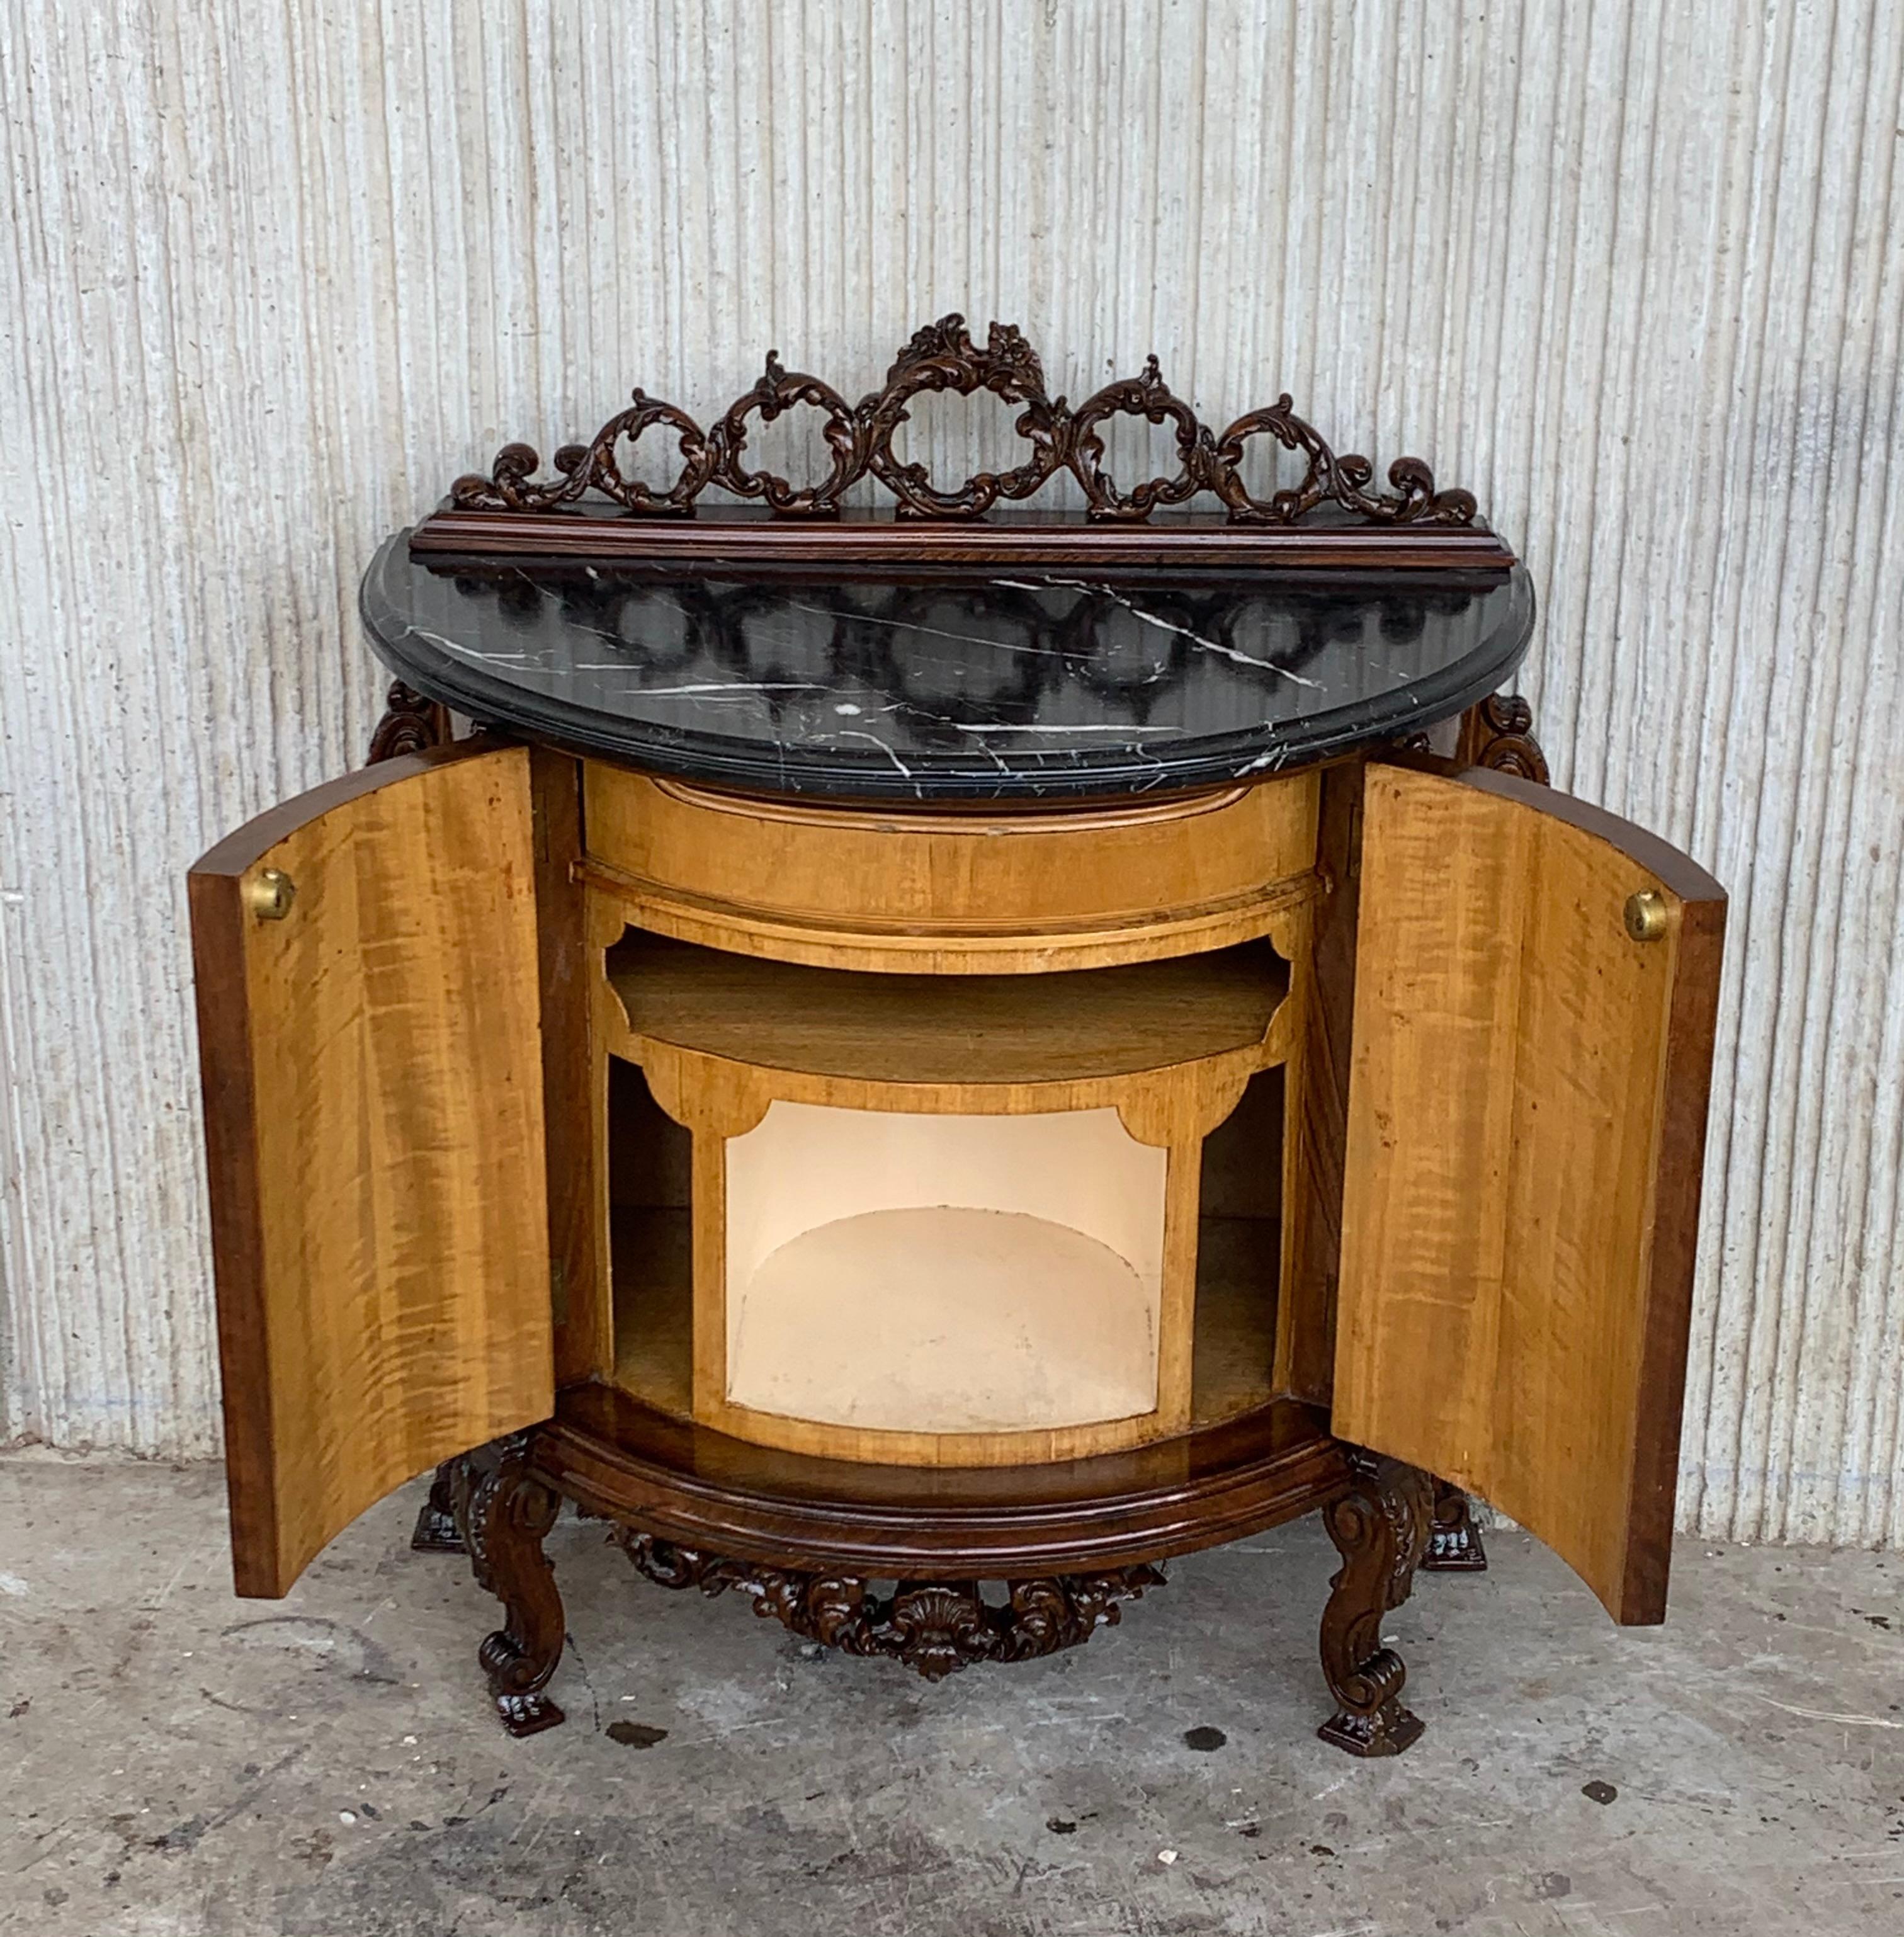 20th century French pair of carved and marquetry nightstands with two doors and hidden drawer

Beautiful pair of carved nightstands. The top has a carved crest and black marble. 
The low part has a drawer and different compartments.
The door has